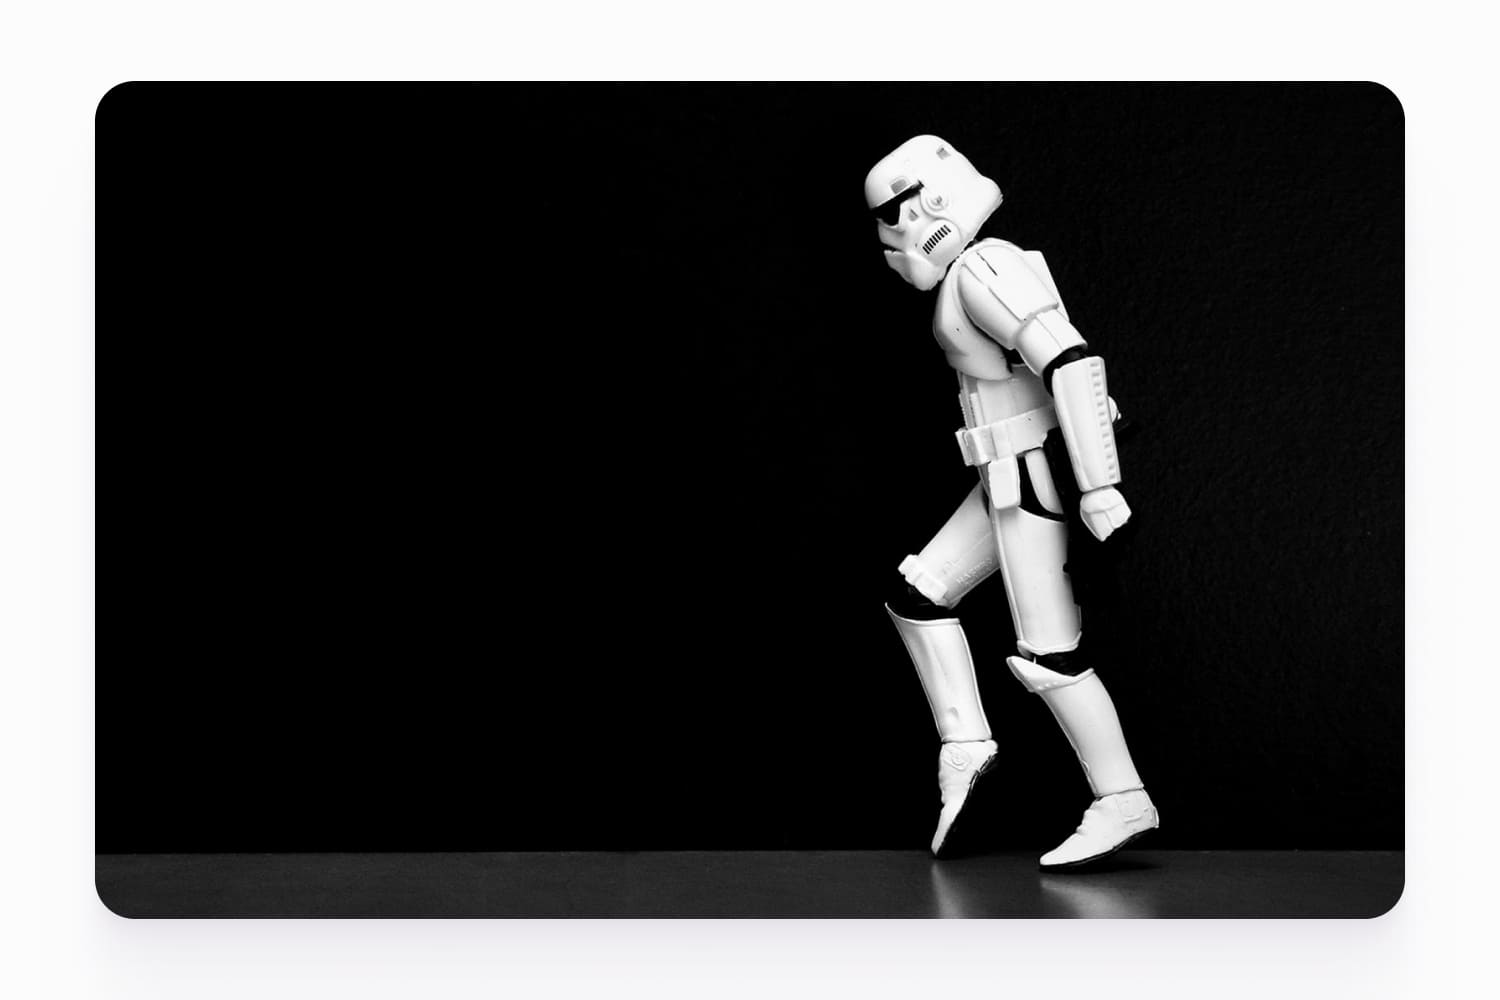 An image of an Imperial stormtrooper from Star Wars on a black background.